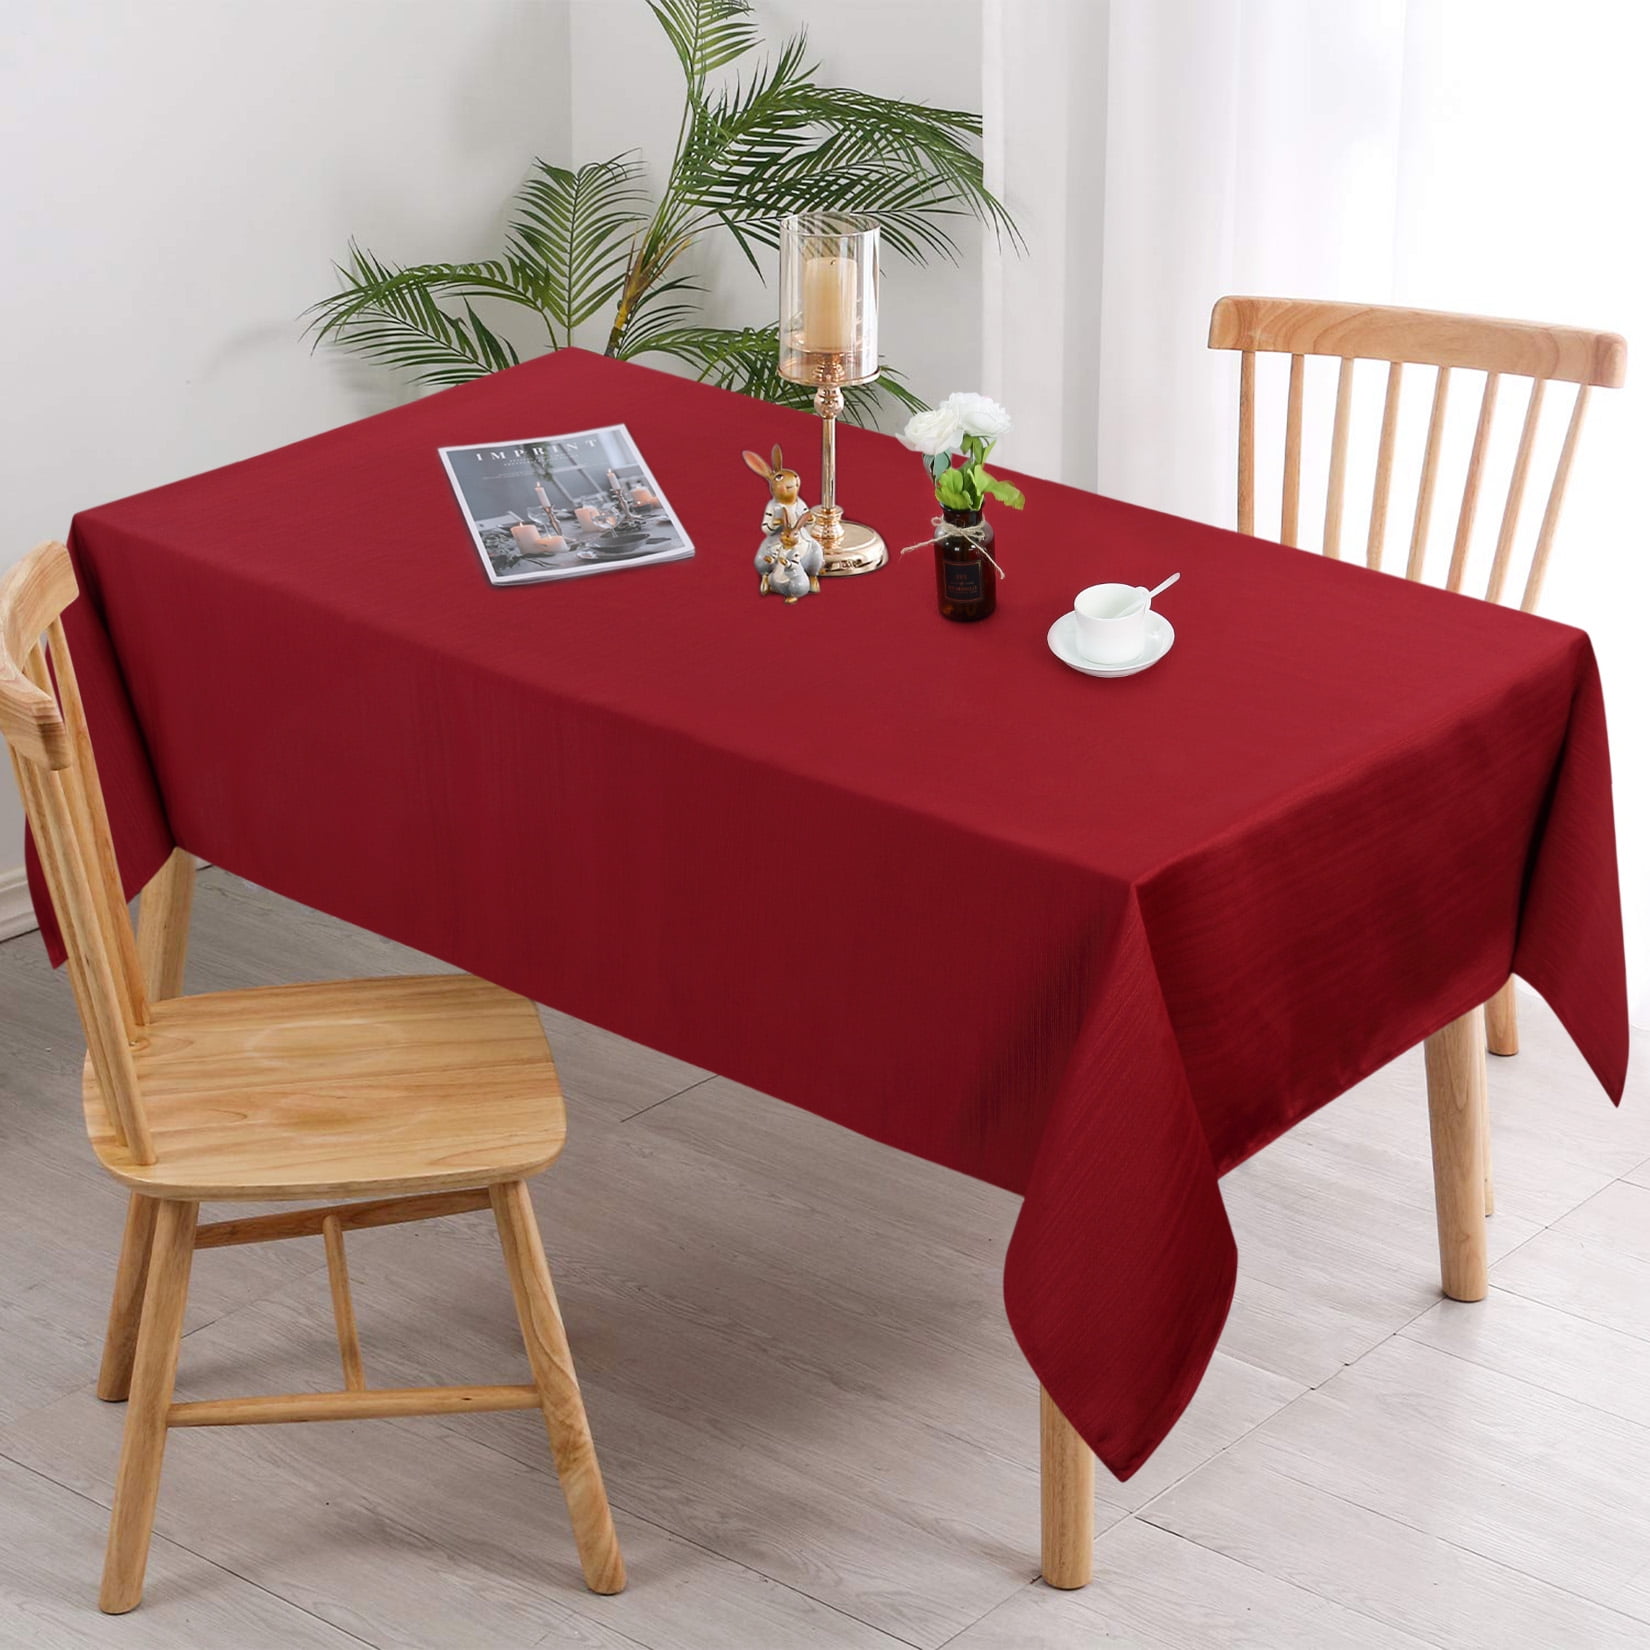 CAROMIO Square Tablecloth Waterproof Fabric Small Table Cloth 52 x 52 Inch Ivory